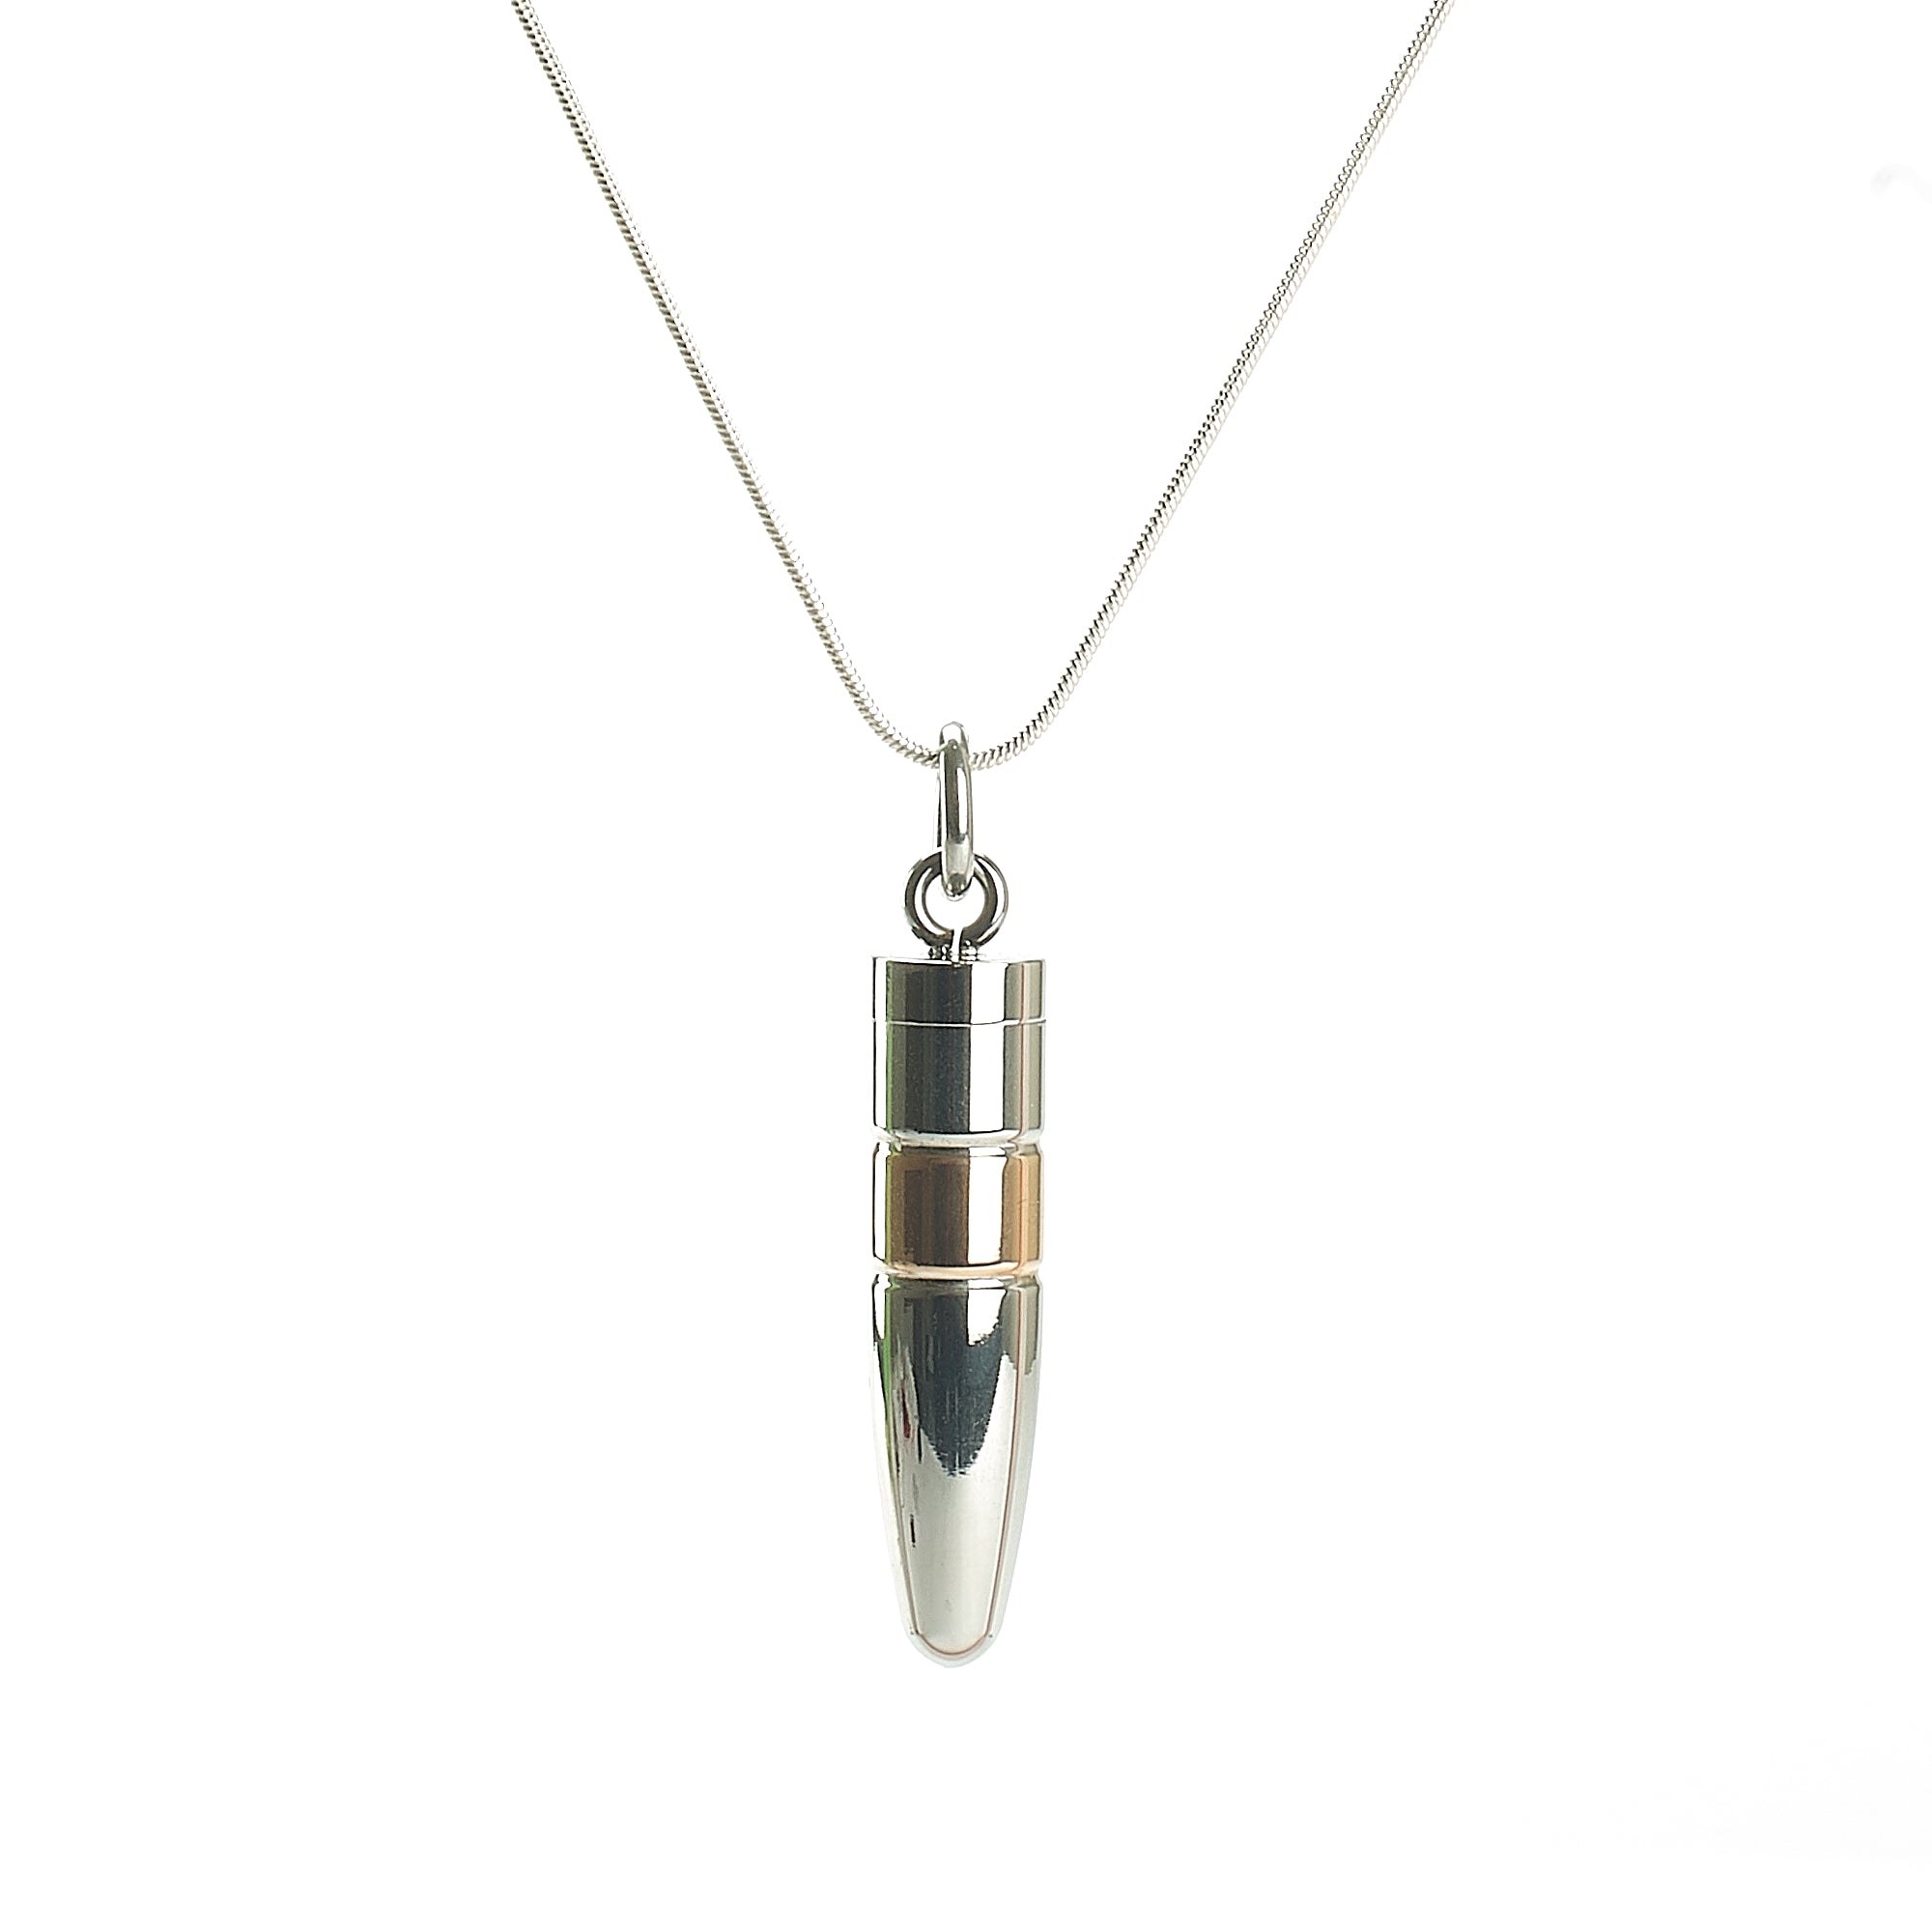 Cremation Pendant - Bullet - Silver and Gold